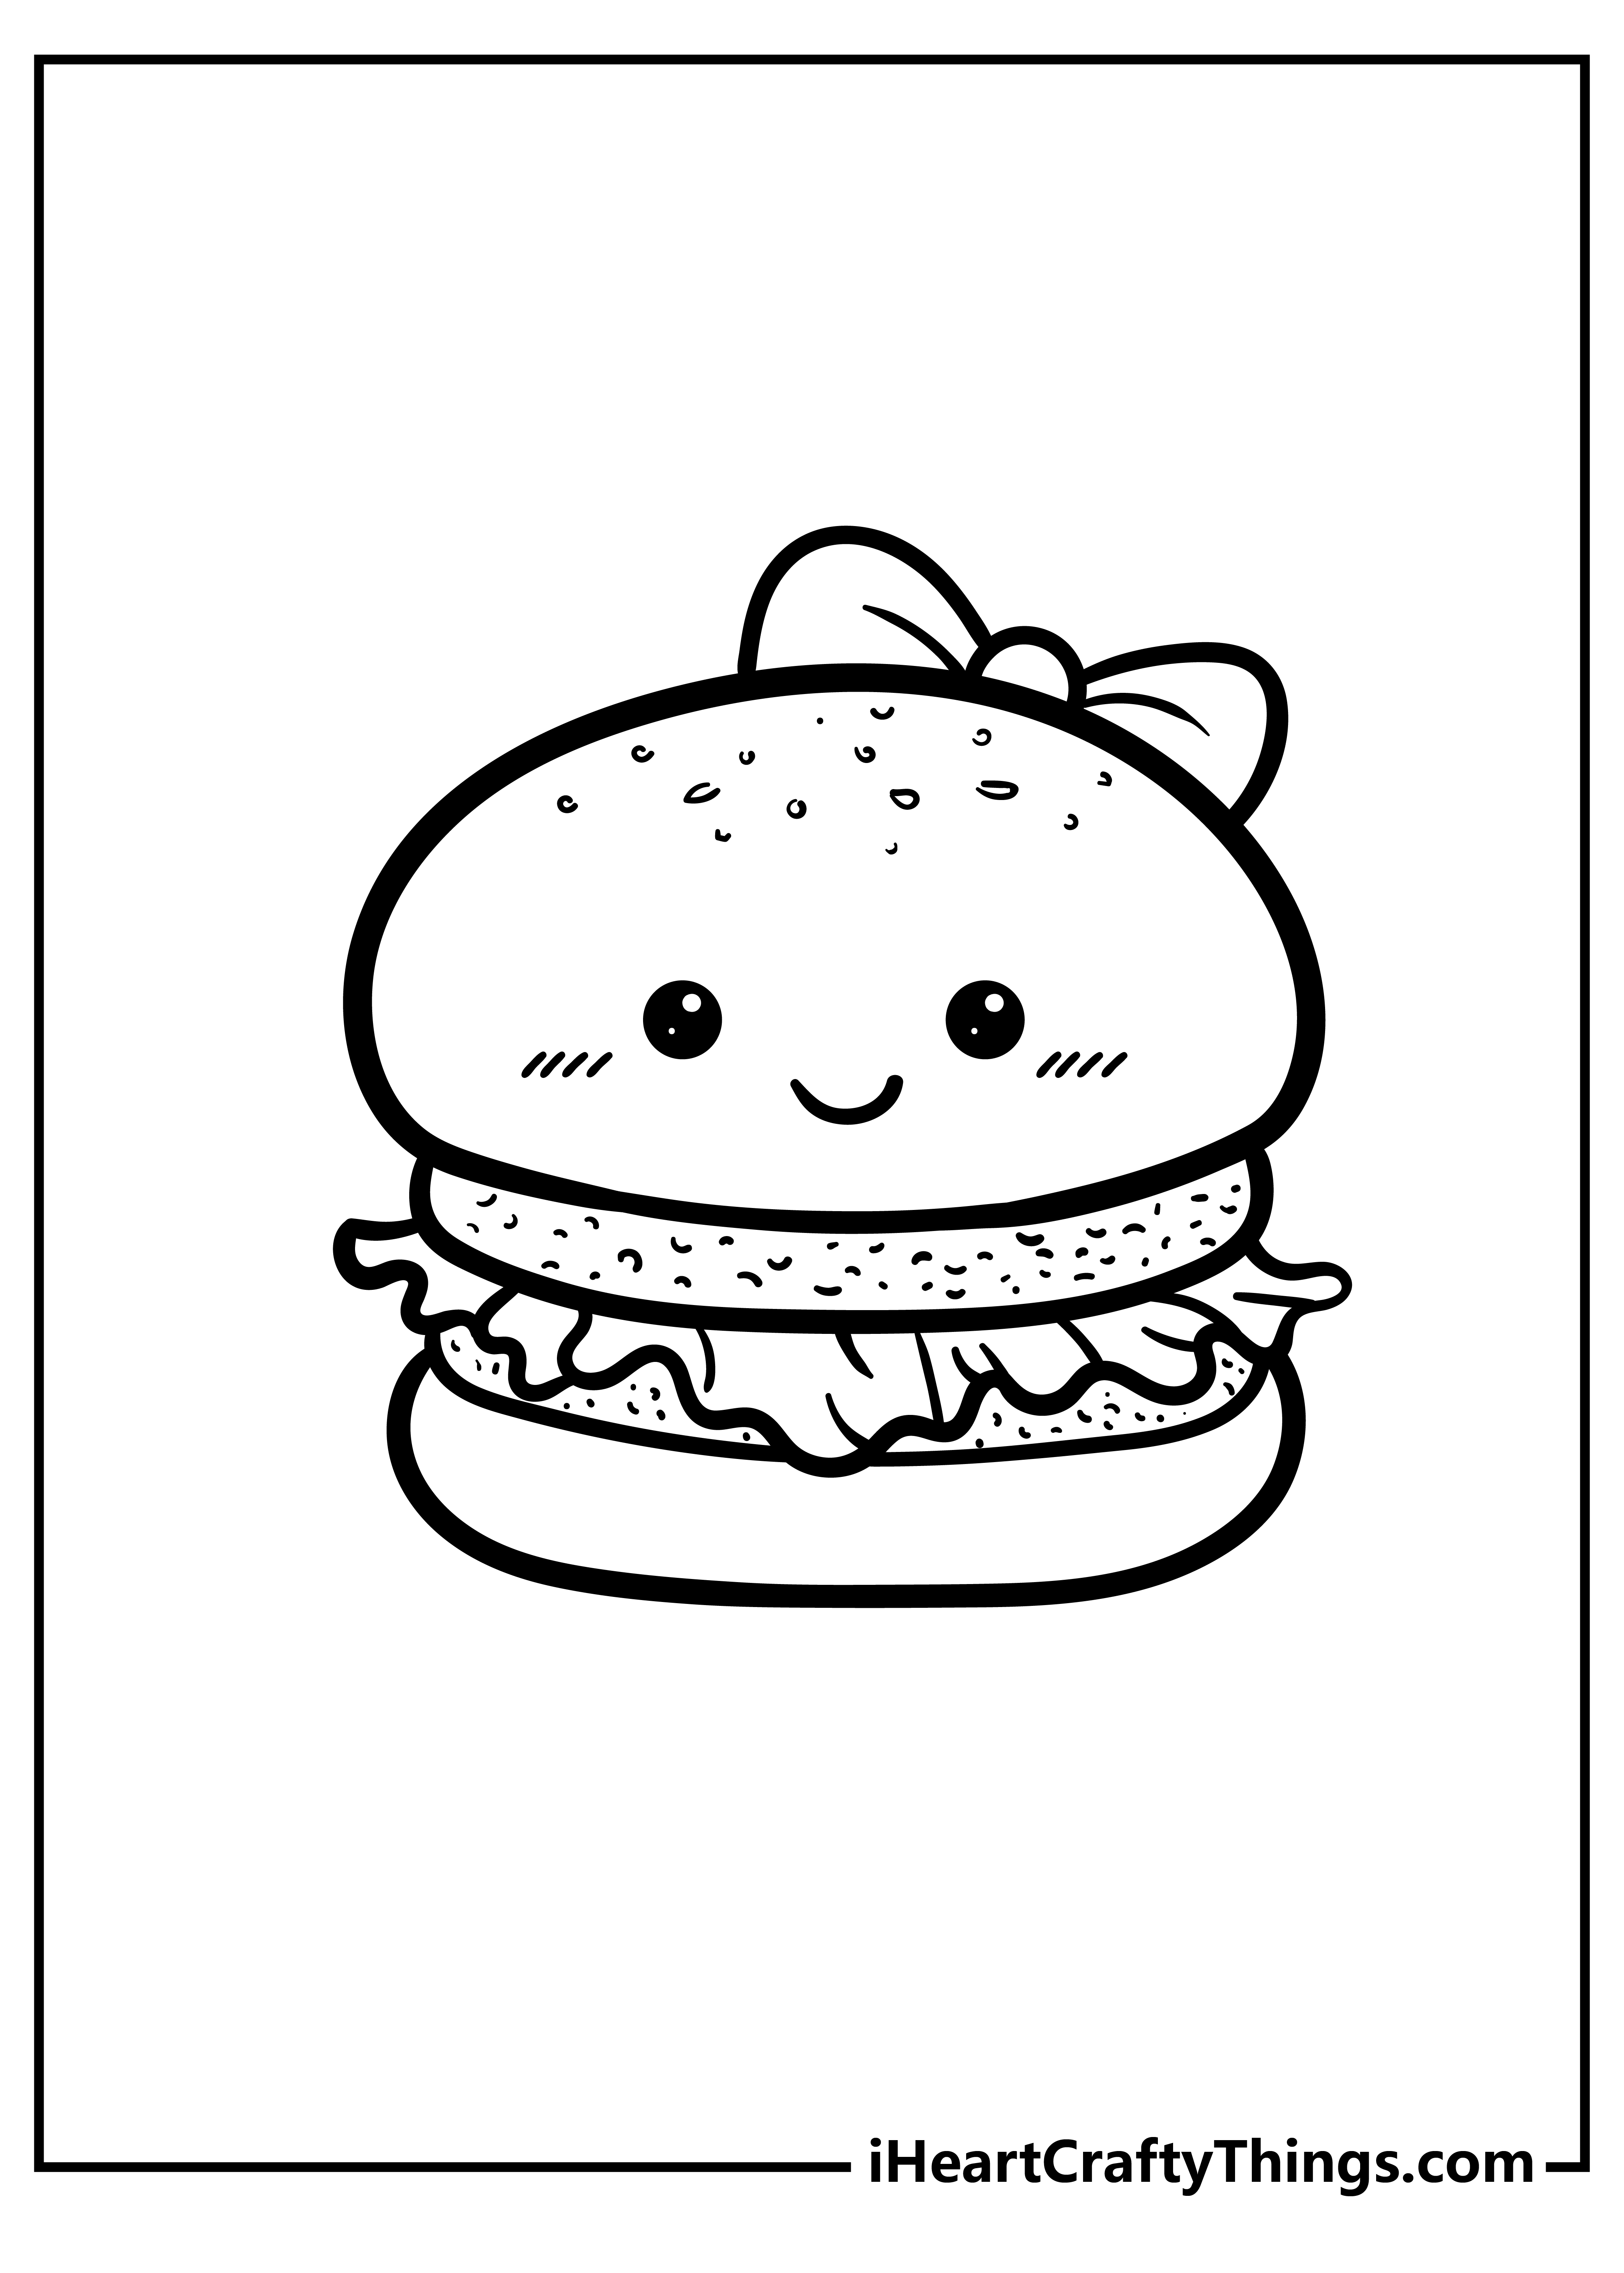 Cute Food Coloring Pages free pdf download